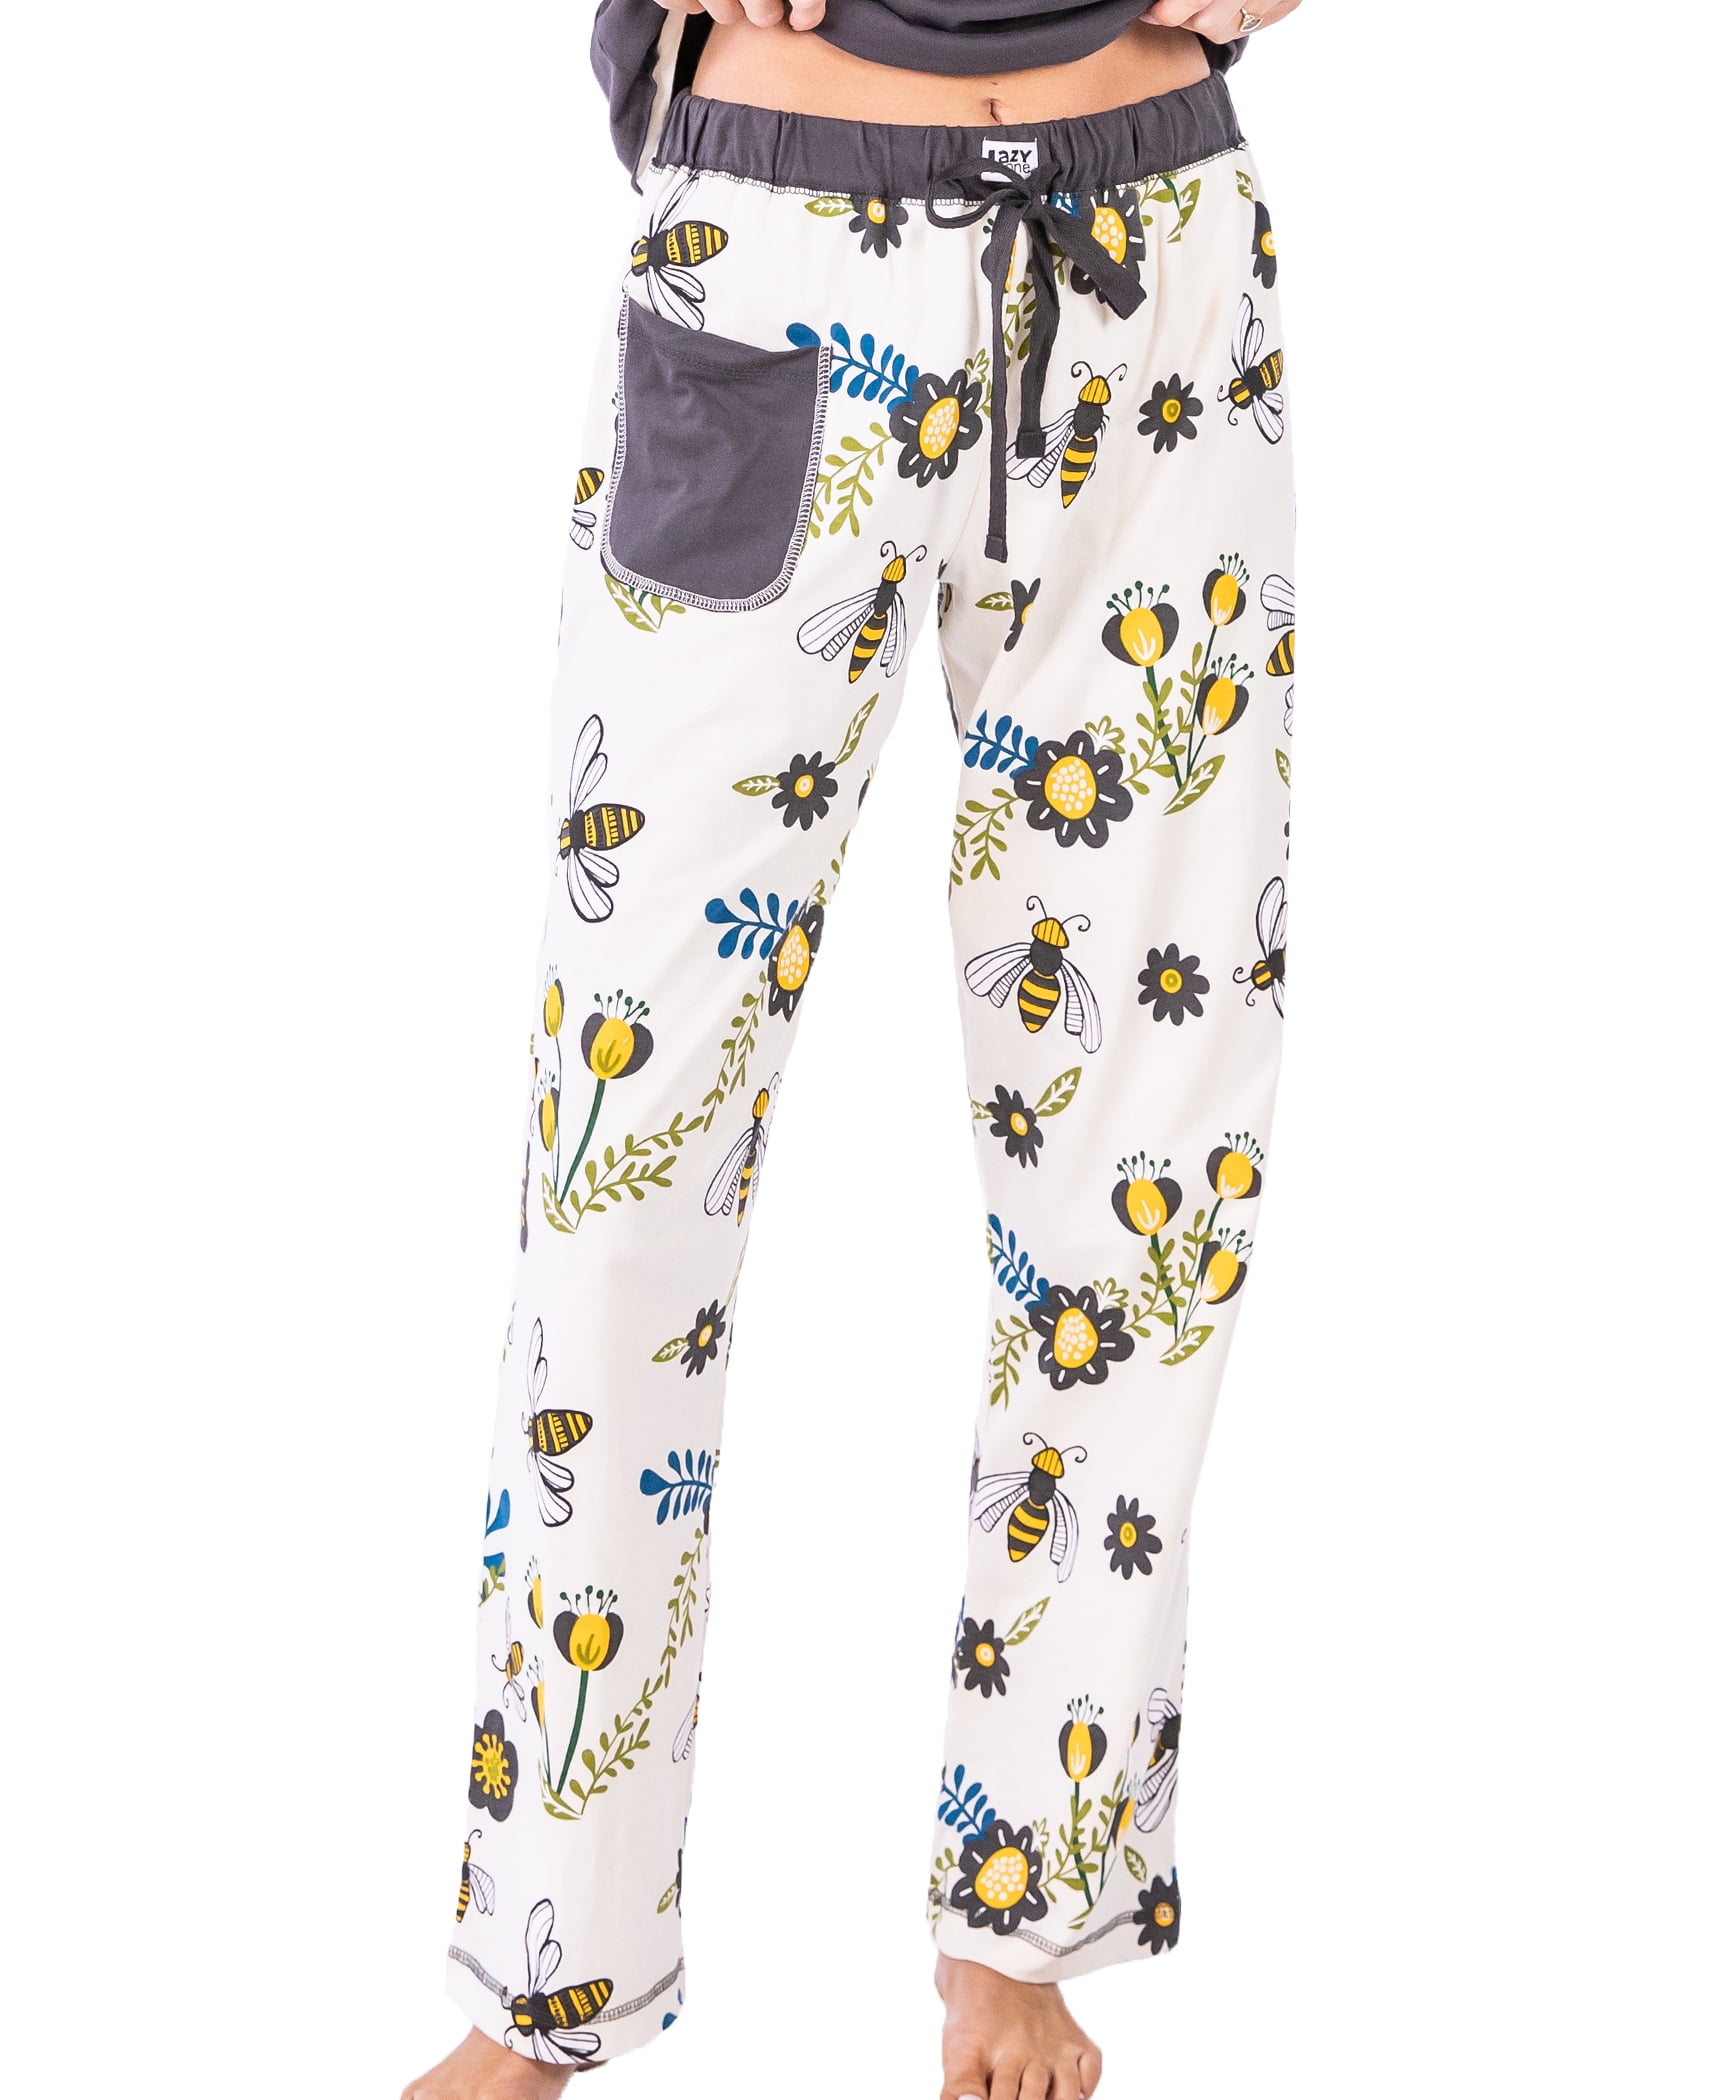 LazyOne Pajamas for Women, Cute Pajama Pants and Top Separates, Queen Bee,  Flowers, Small 